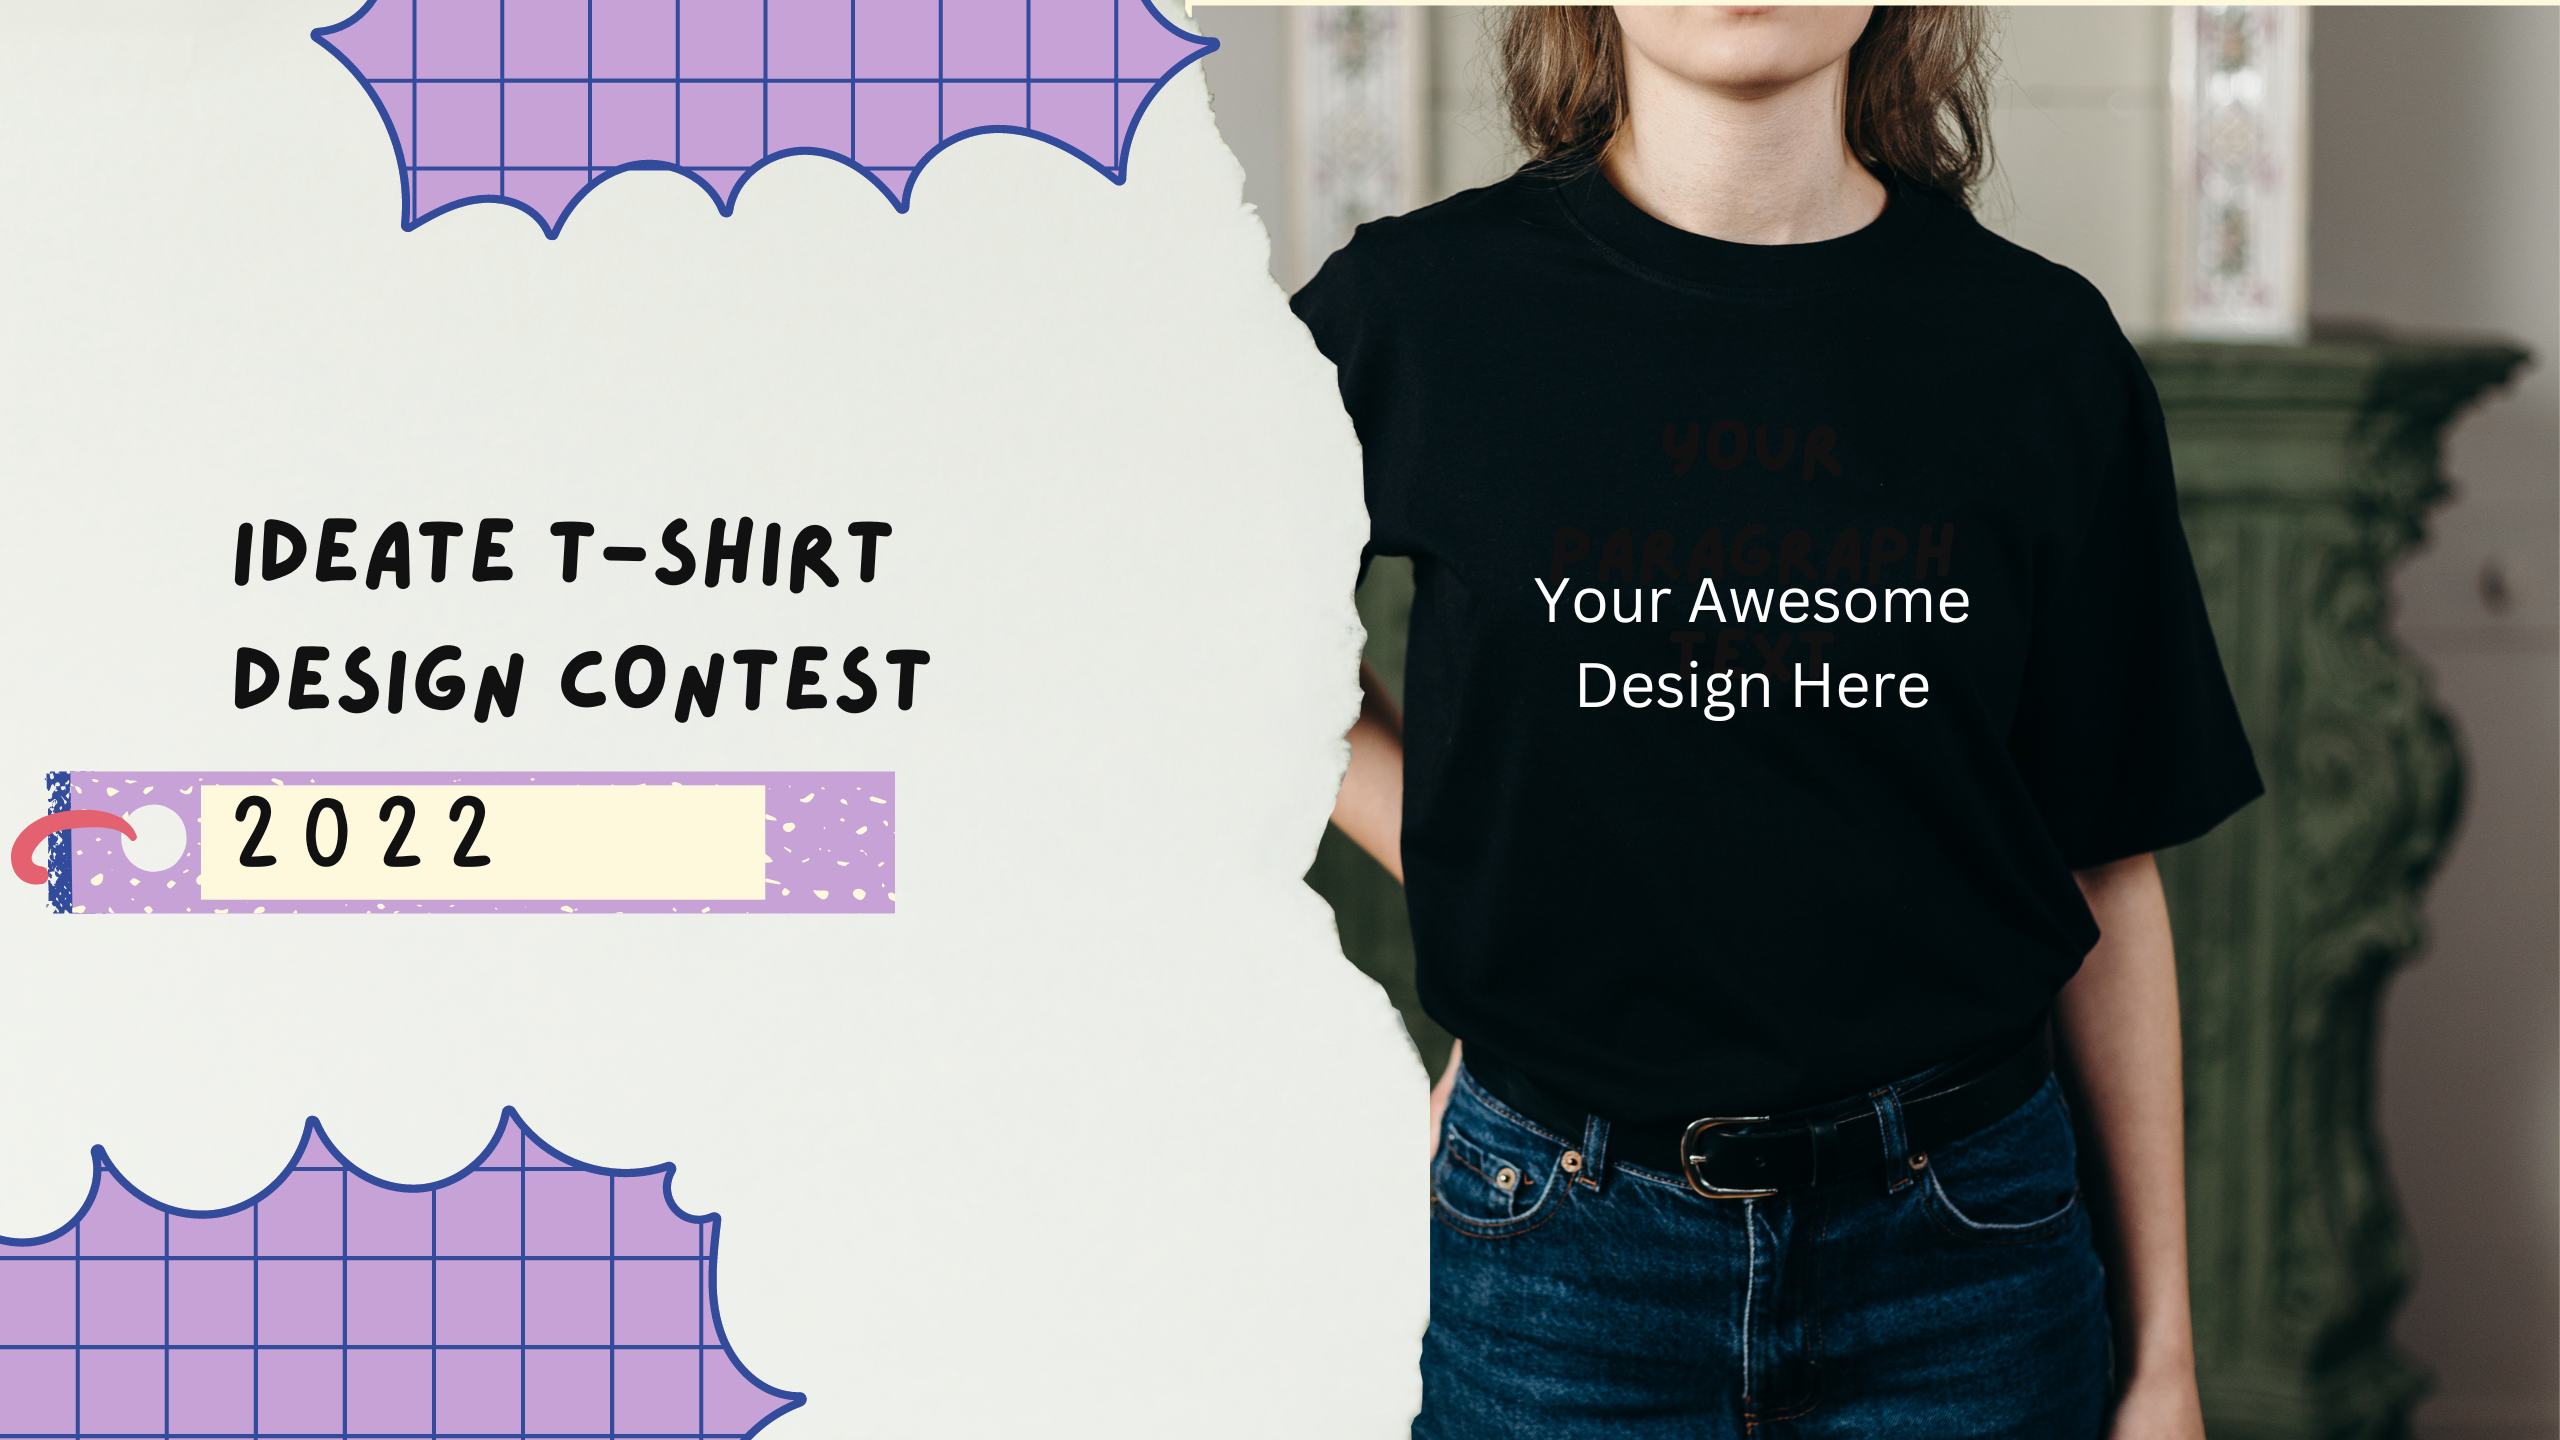 ideate-t-shirt-design-contest-banner.png